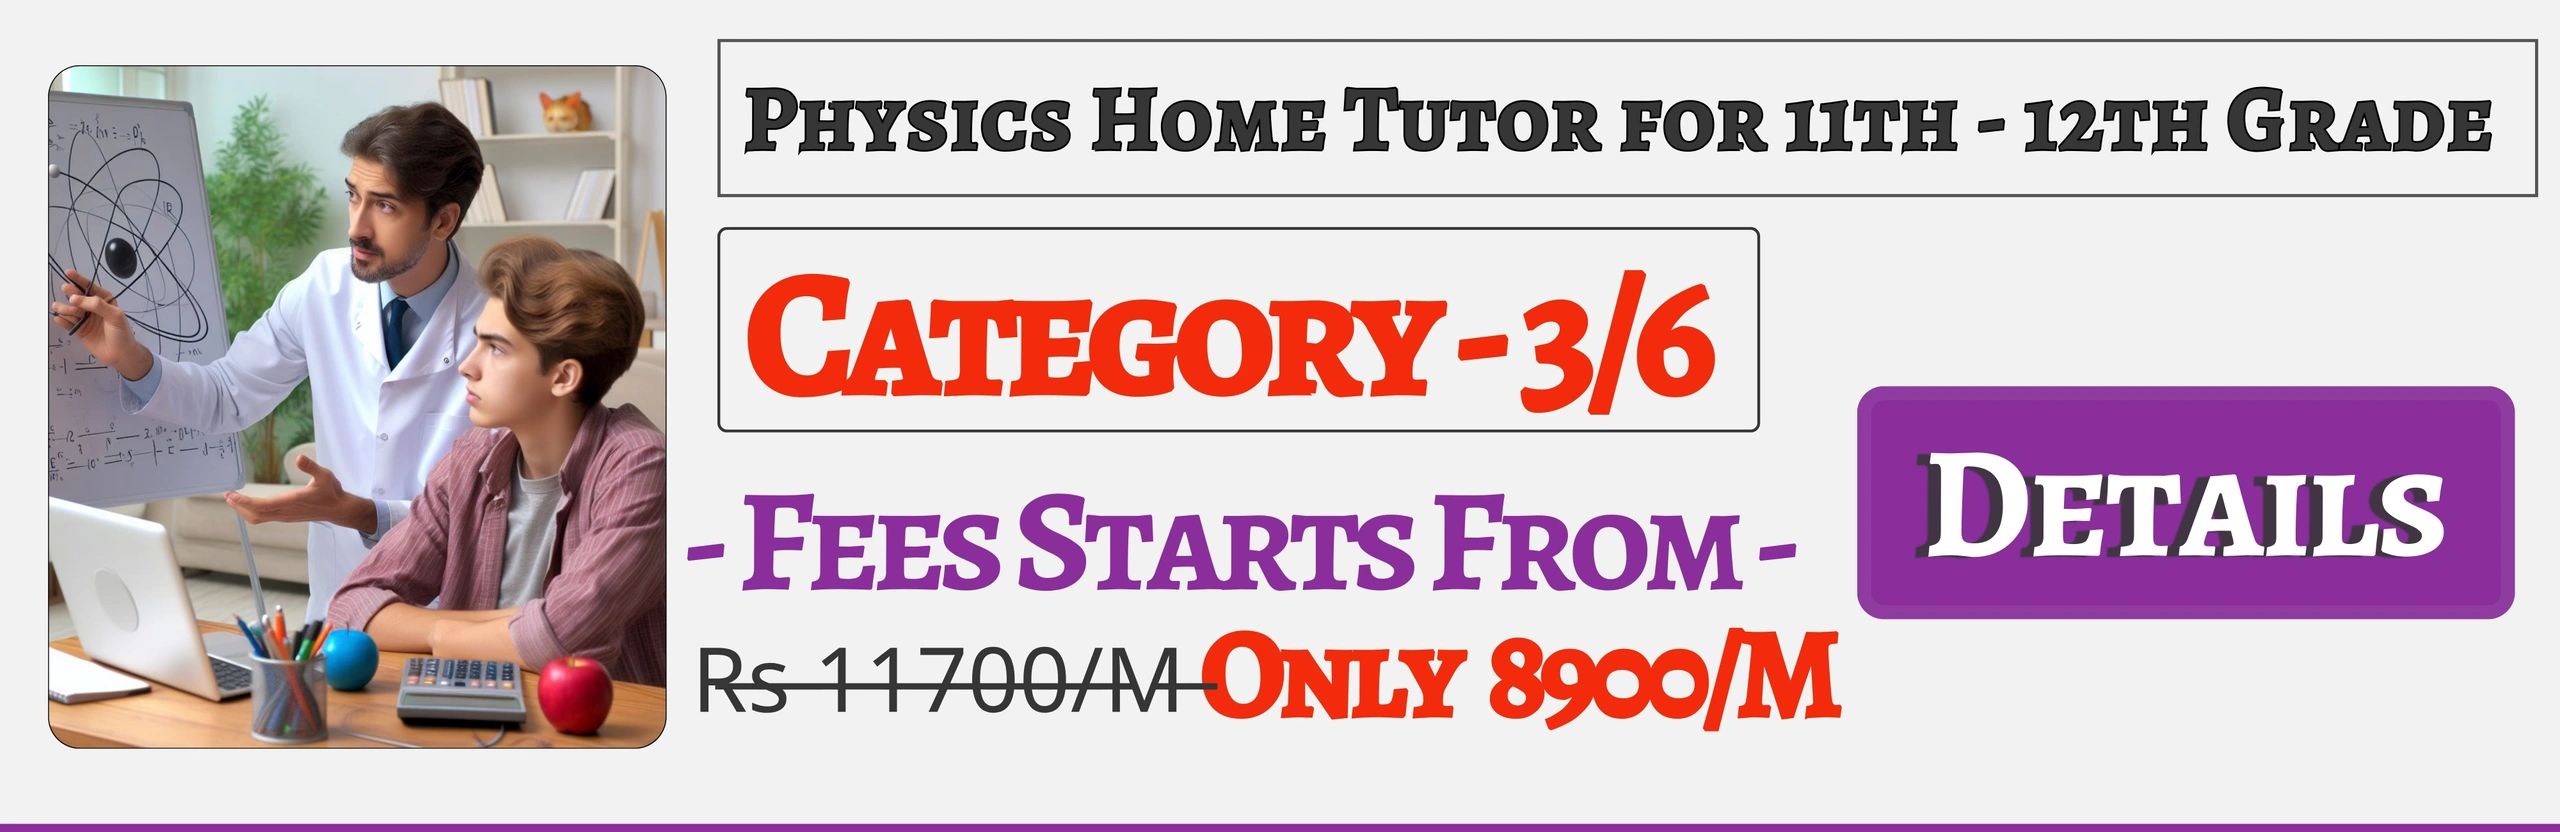 Book Best Nearby Physics Home Tuition Tutors For 11th & 12th In Jaipur , Fees Only 8900/M